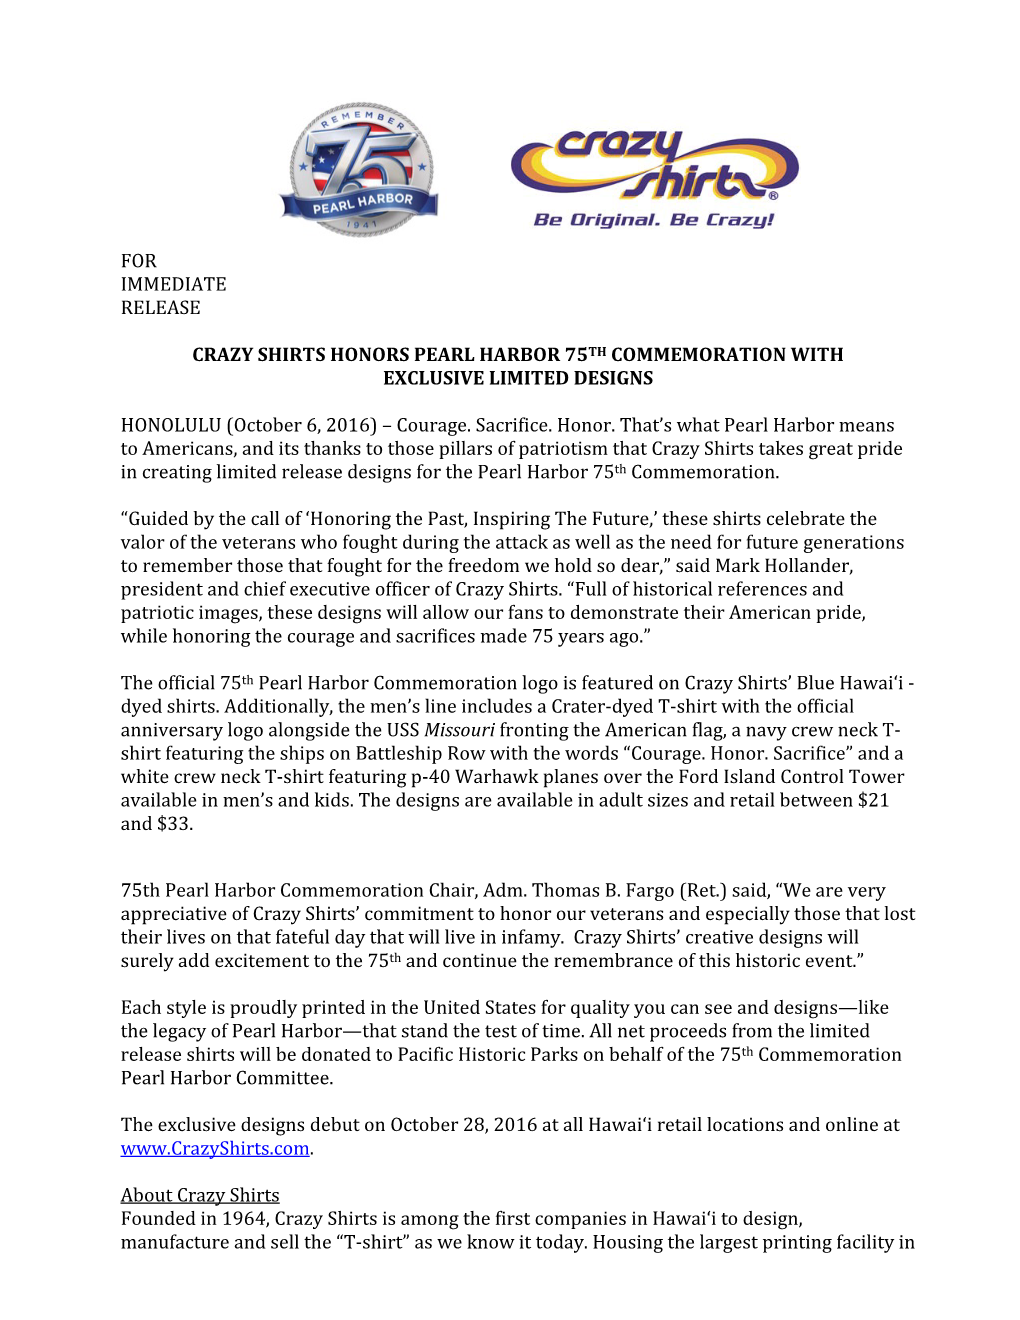 For Immediate Release Crazy Shirts Honors Pearl